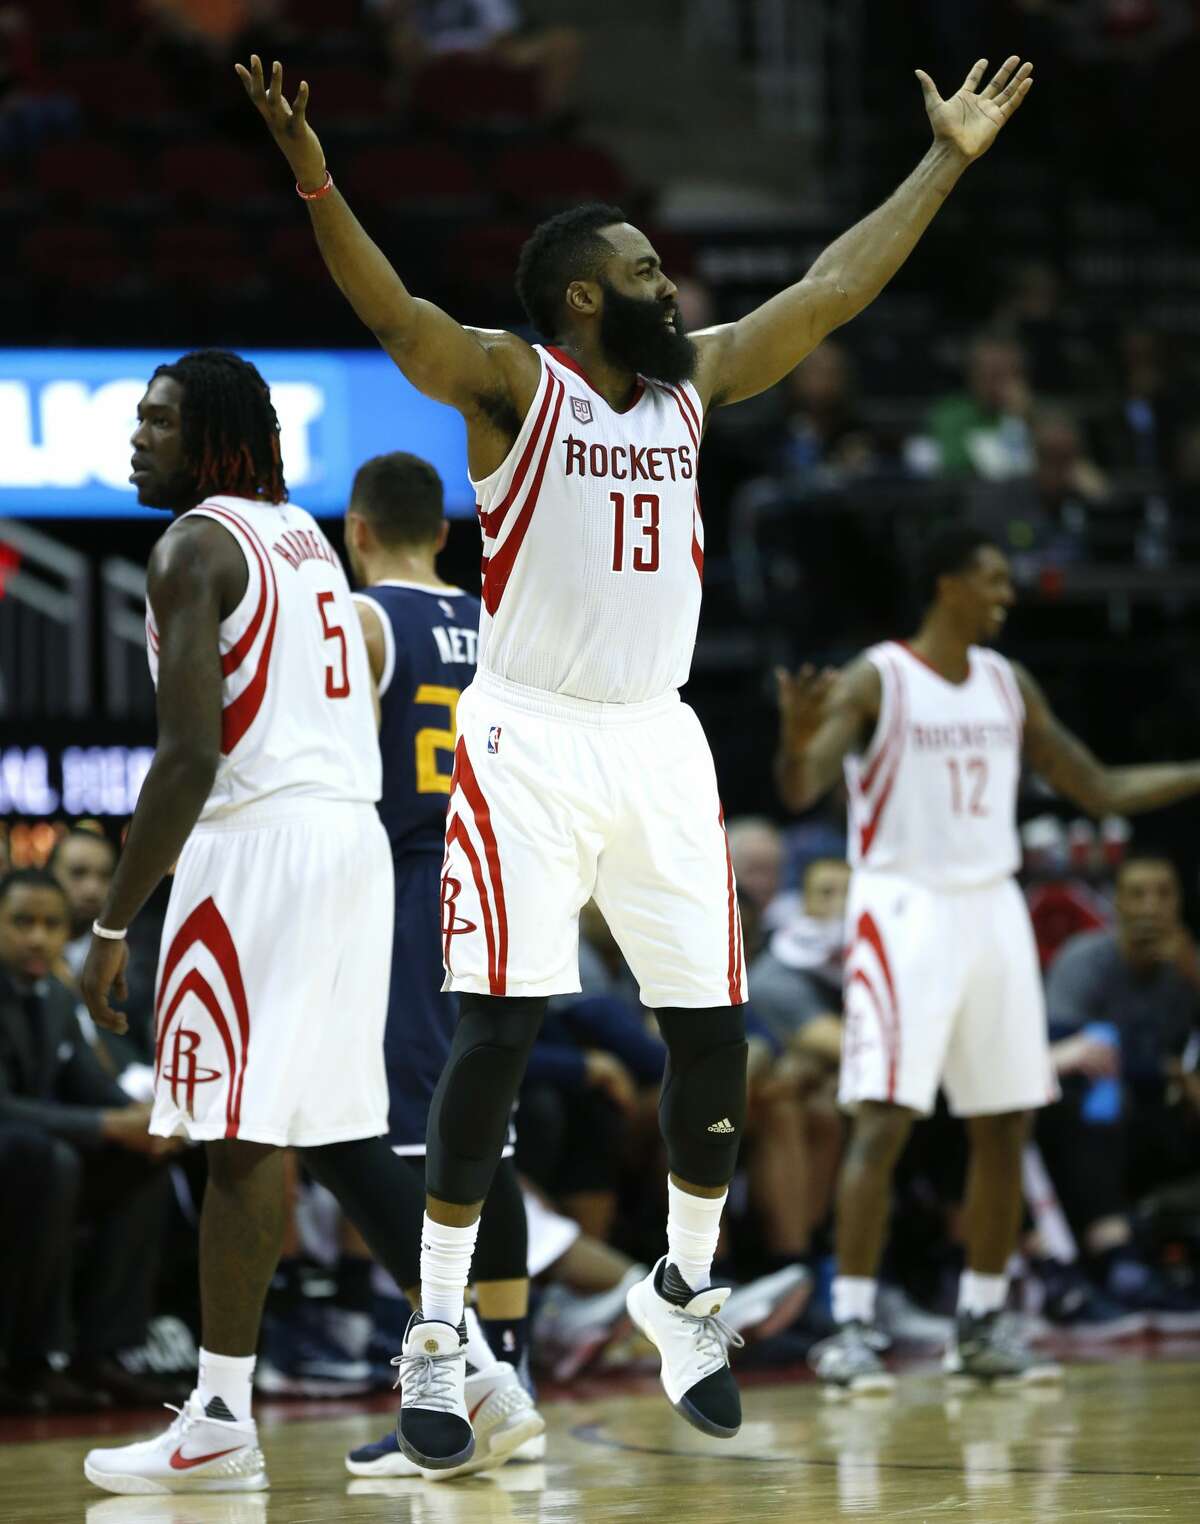 Houston Rockets guard James Harden (13) reacts after a no call following a collision with Utah Jazz guard Raul Neto during the first half of an NBA basketball game at Toyota Center on Wednesday, March 8, 2017, in Houston. ( Brett Coomer / Houston Chronicle )